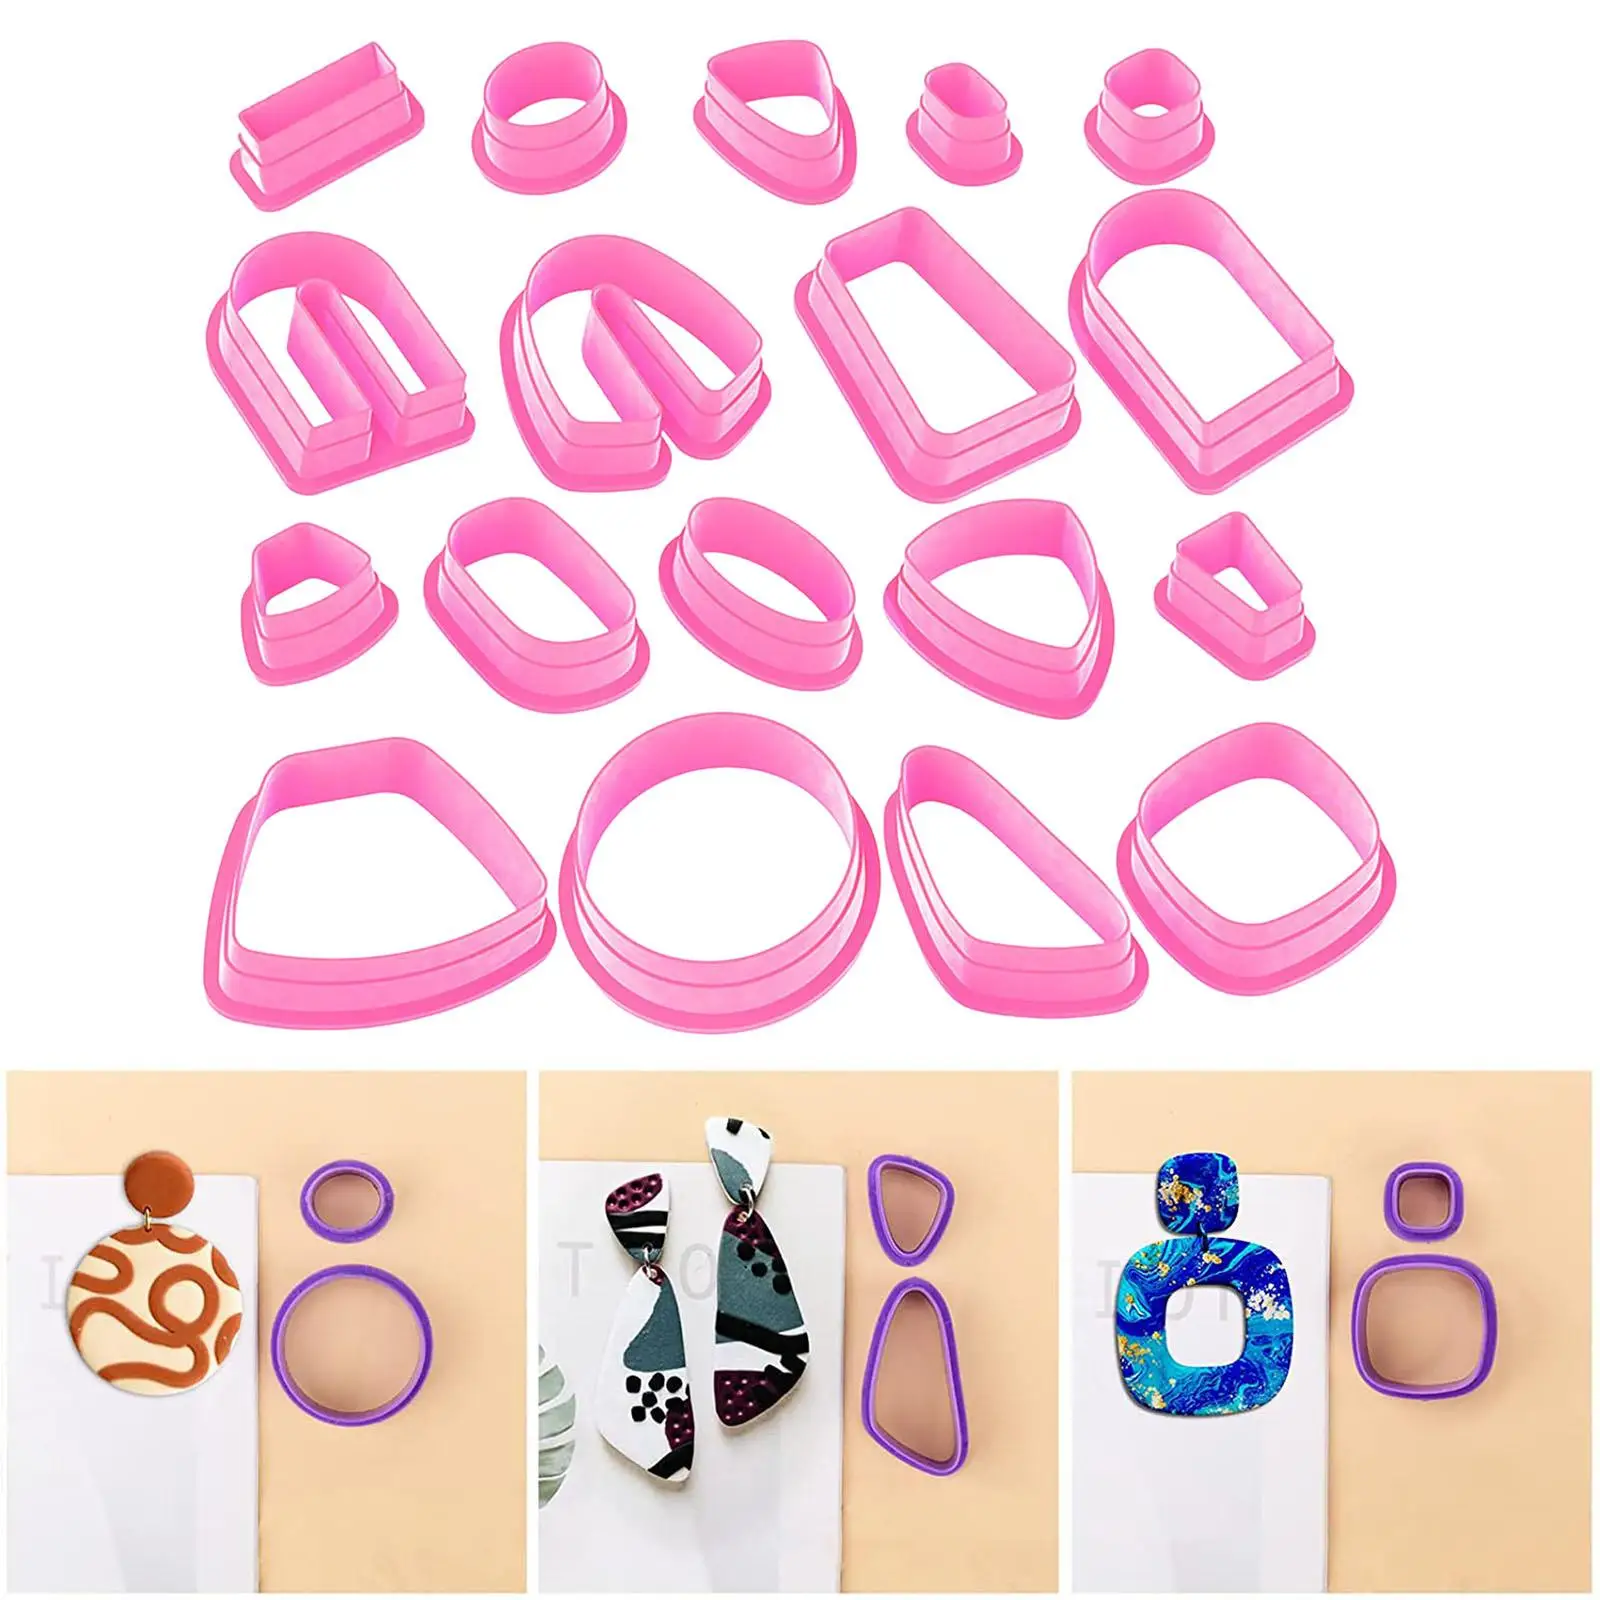 18 Pieces Plastic Polymer Clay Cutters Earring Making Supplies Shapes Art Crafts Kids Polymer Clay Jewelry Clay Cutting Tools